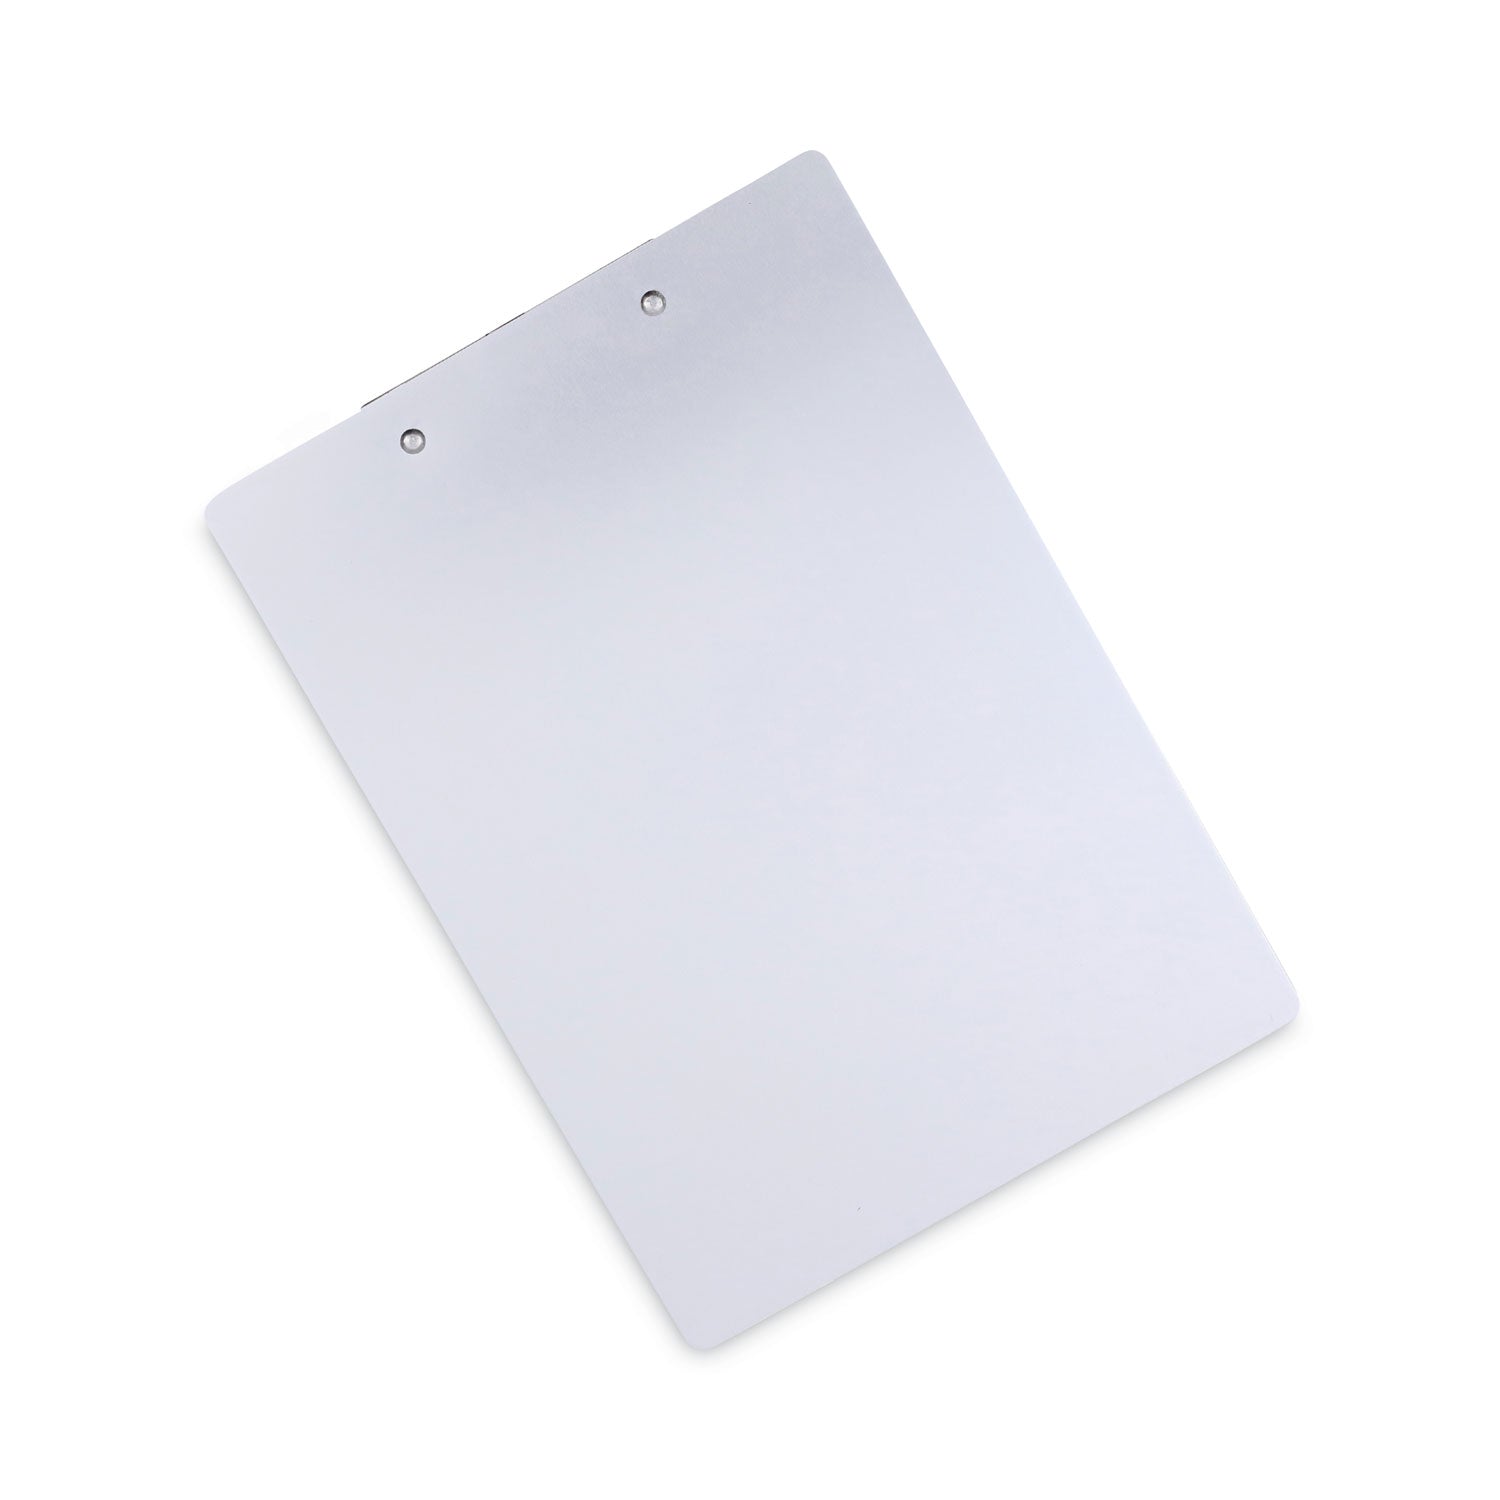 aluminum-clipboard-with-low-profile-clip-05-clip-capacity-holds-85-x-11-sheets-aluminum_unv40301 - 7